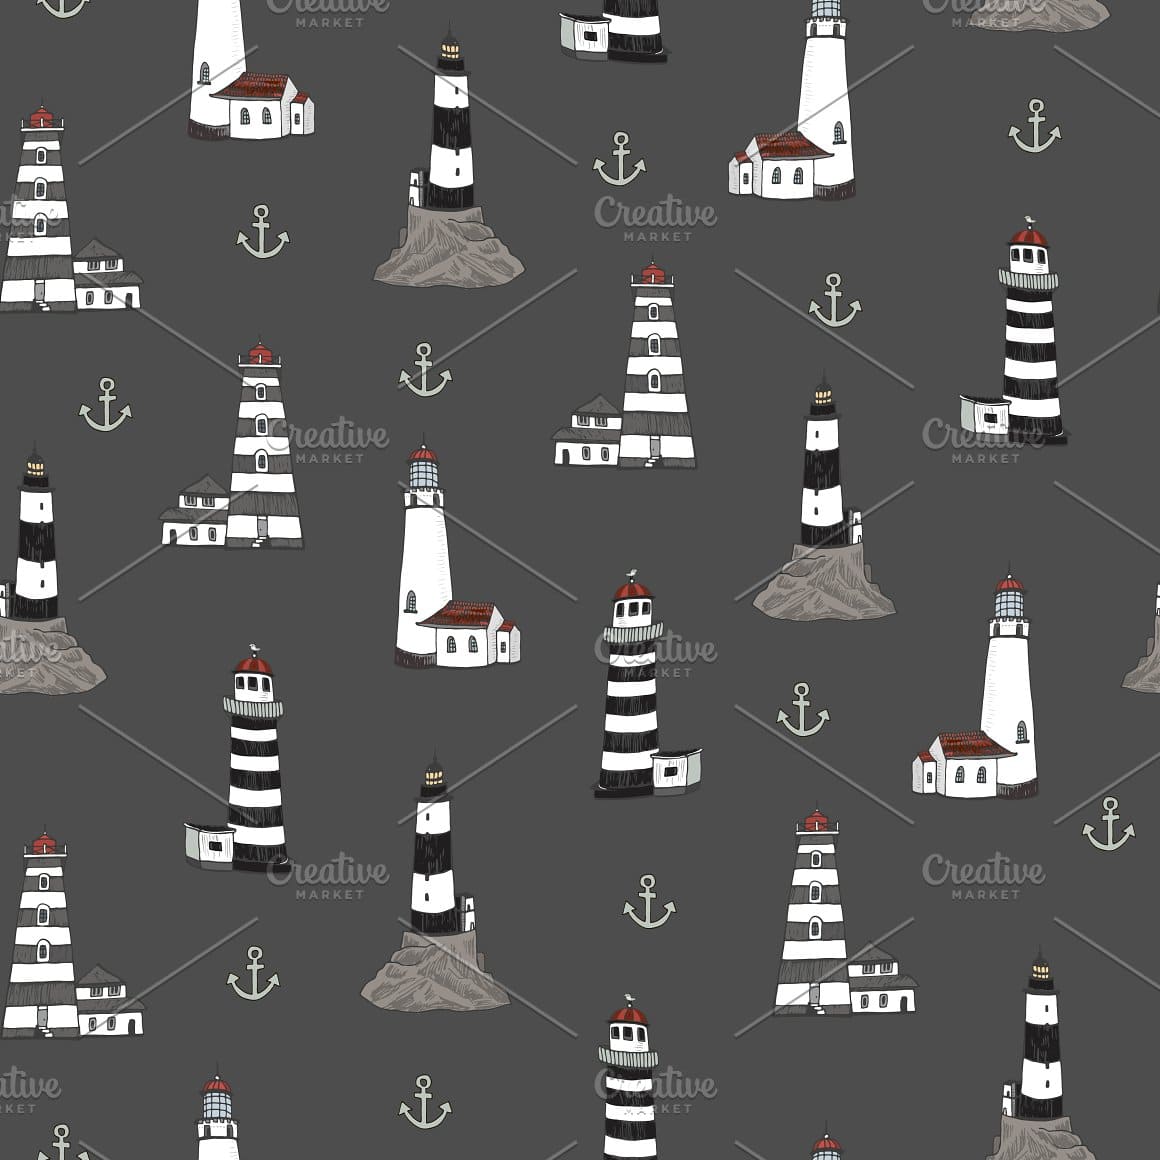 Lighthouses and gray anchors are depicted on a dark gray background.